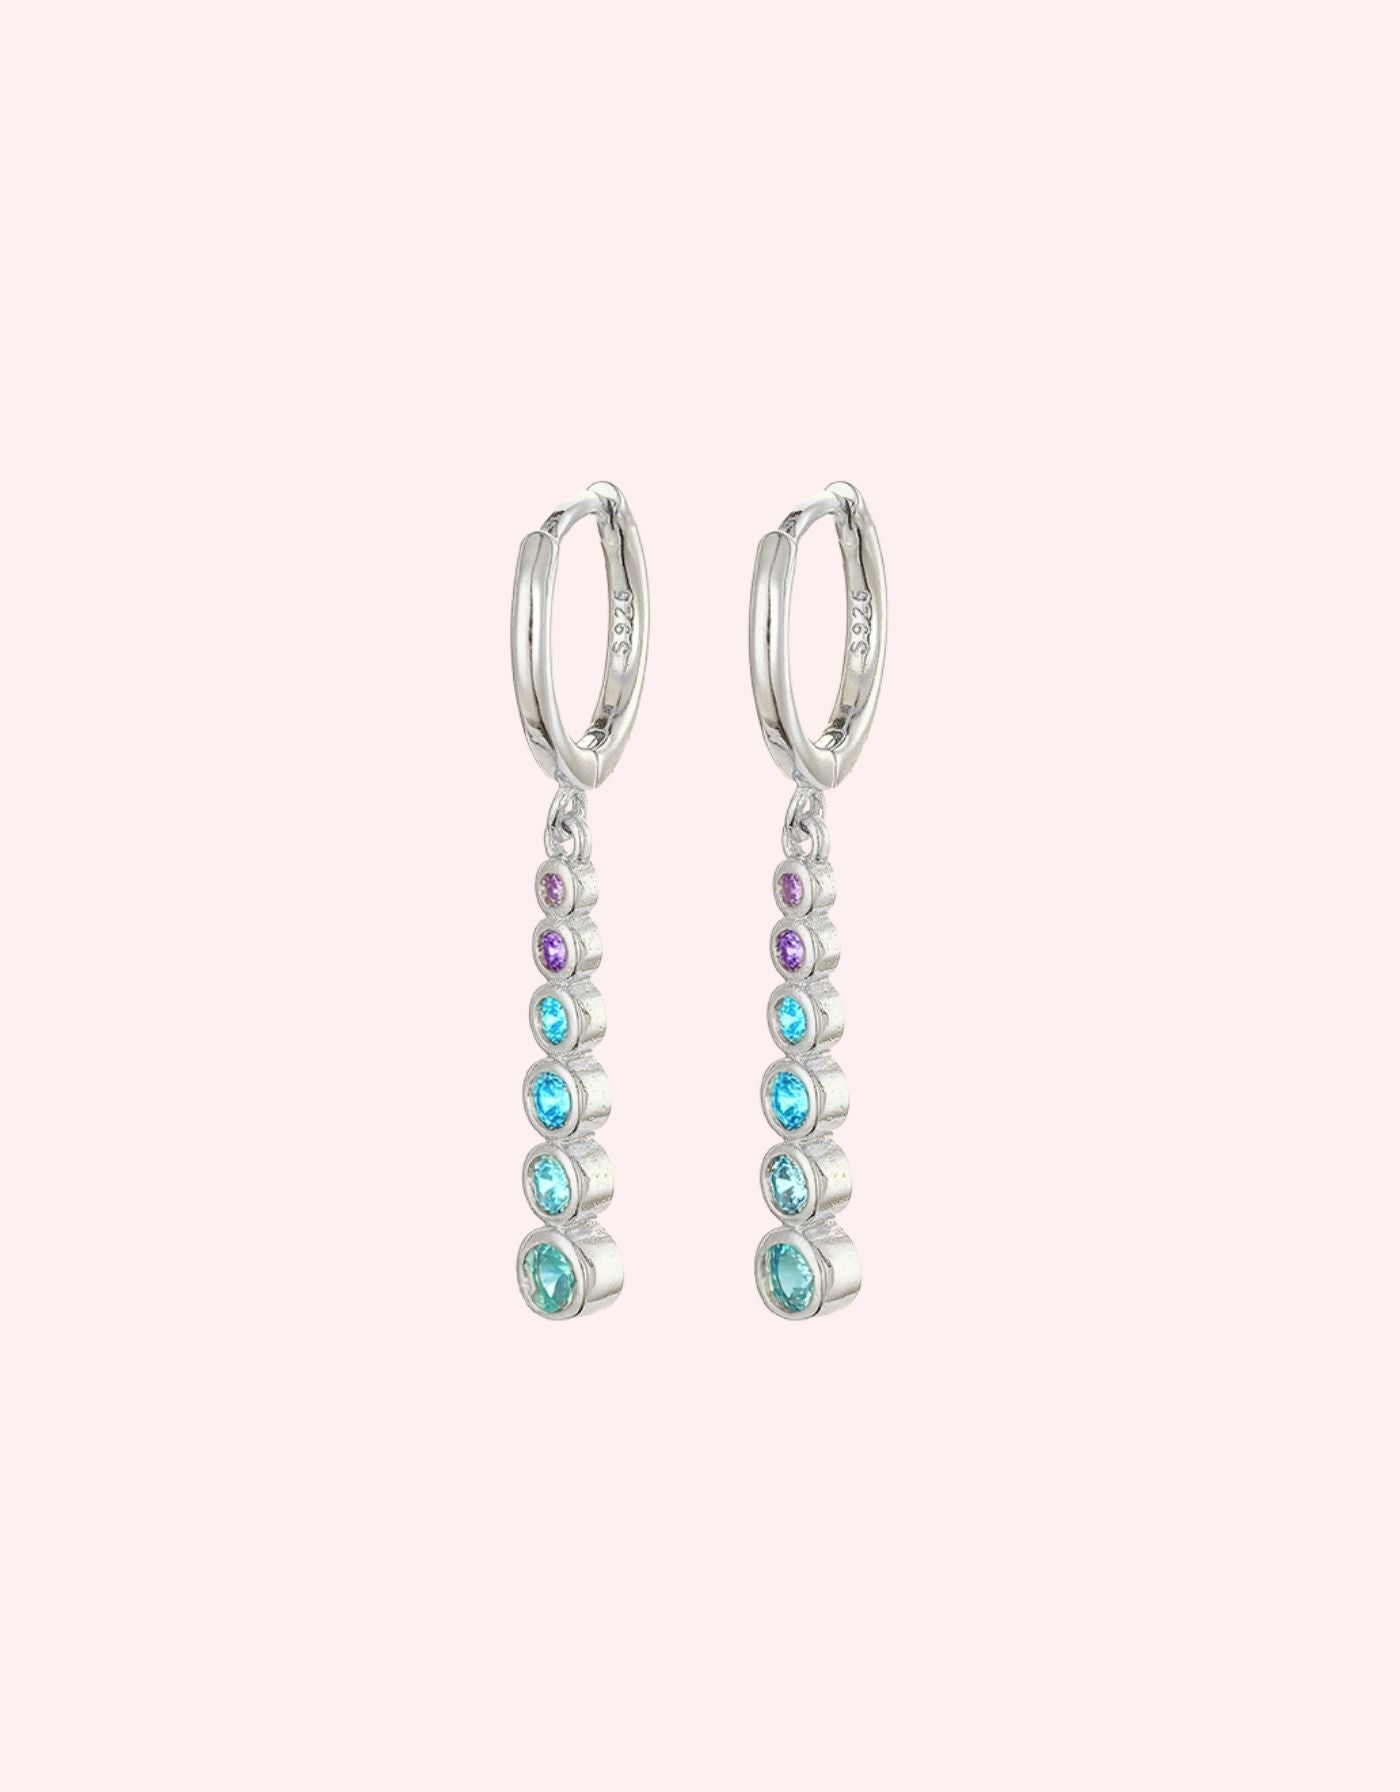 summer earrings, cubic zirconia huggies, wedding guest earrings. Crystal huggie hoops with sparkling gemstones, stylish and versatile earrings perfect for everyday wear, featuring secure closures and high-quality materials